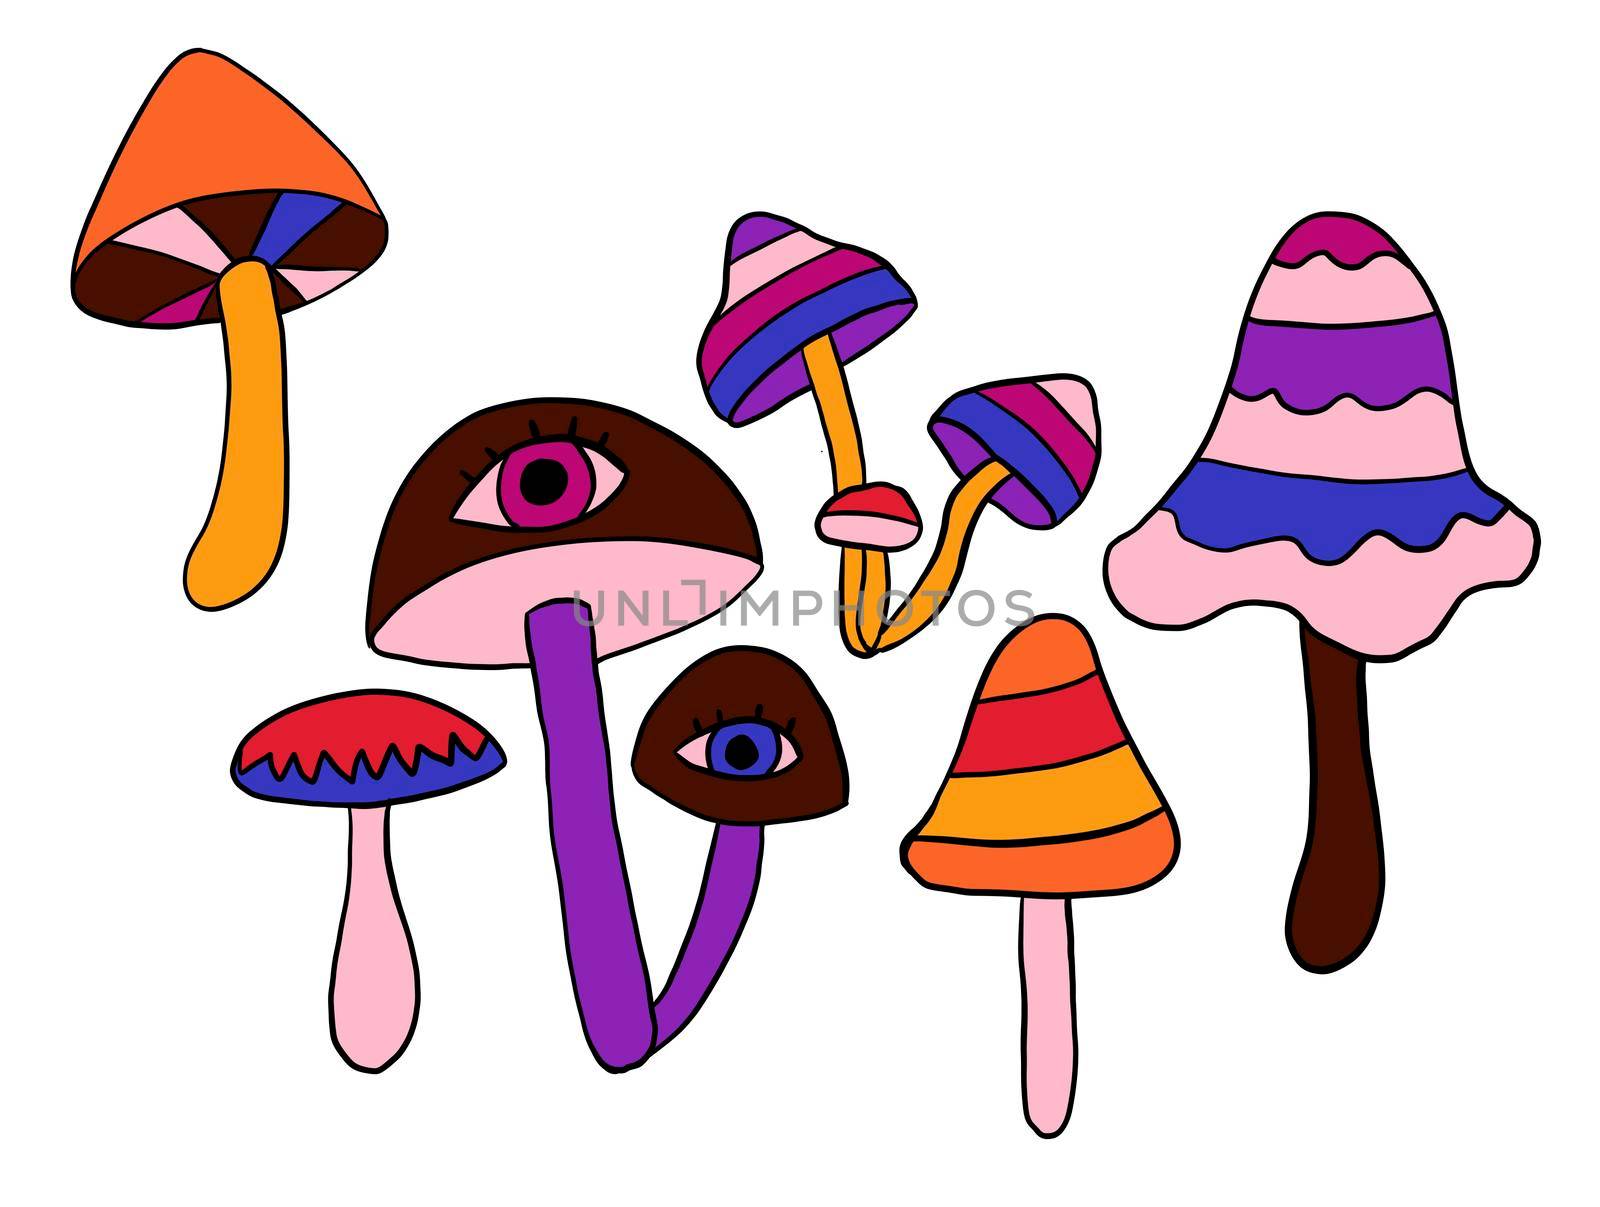 Hand drawn clipart illustration with hippie groovy mushrooms in orange purple blue red colors. Retro vintage 1960s 1970s style, trippy wild bright background with hallucination hypnotic elements